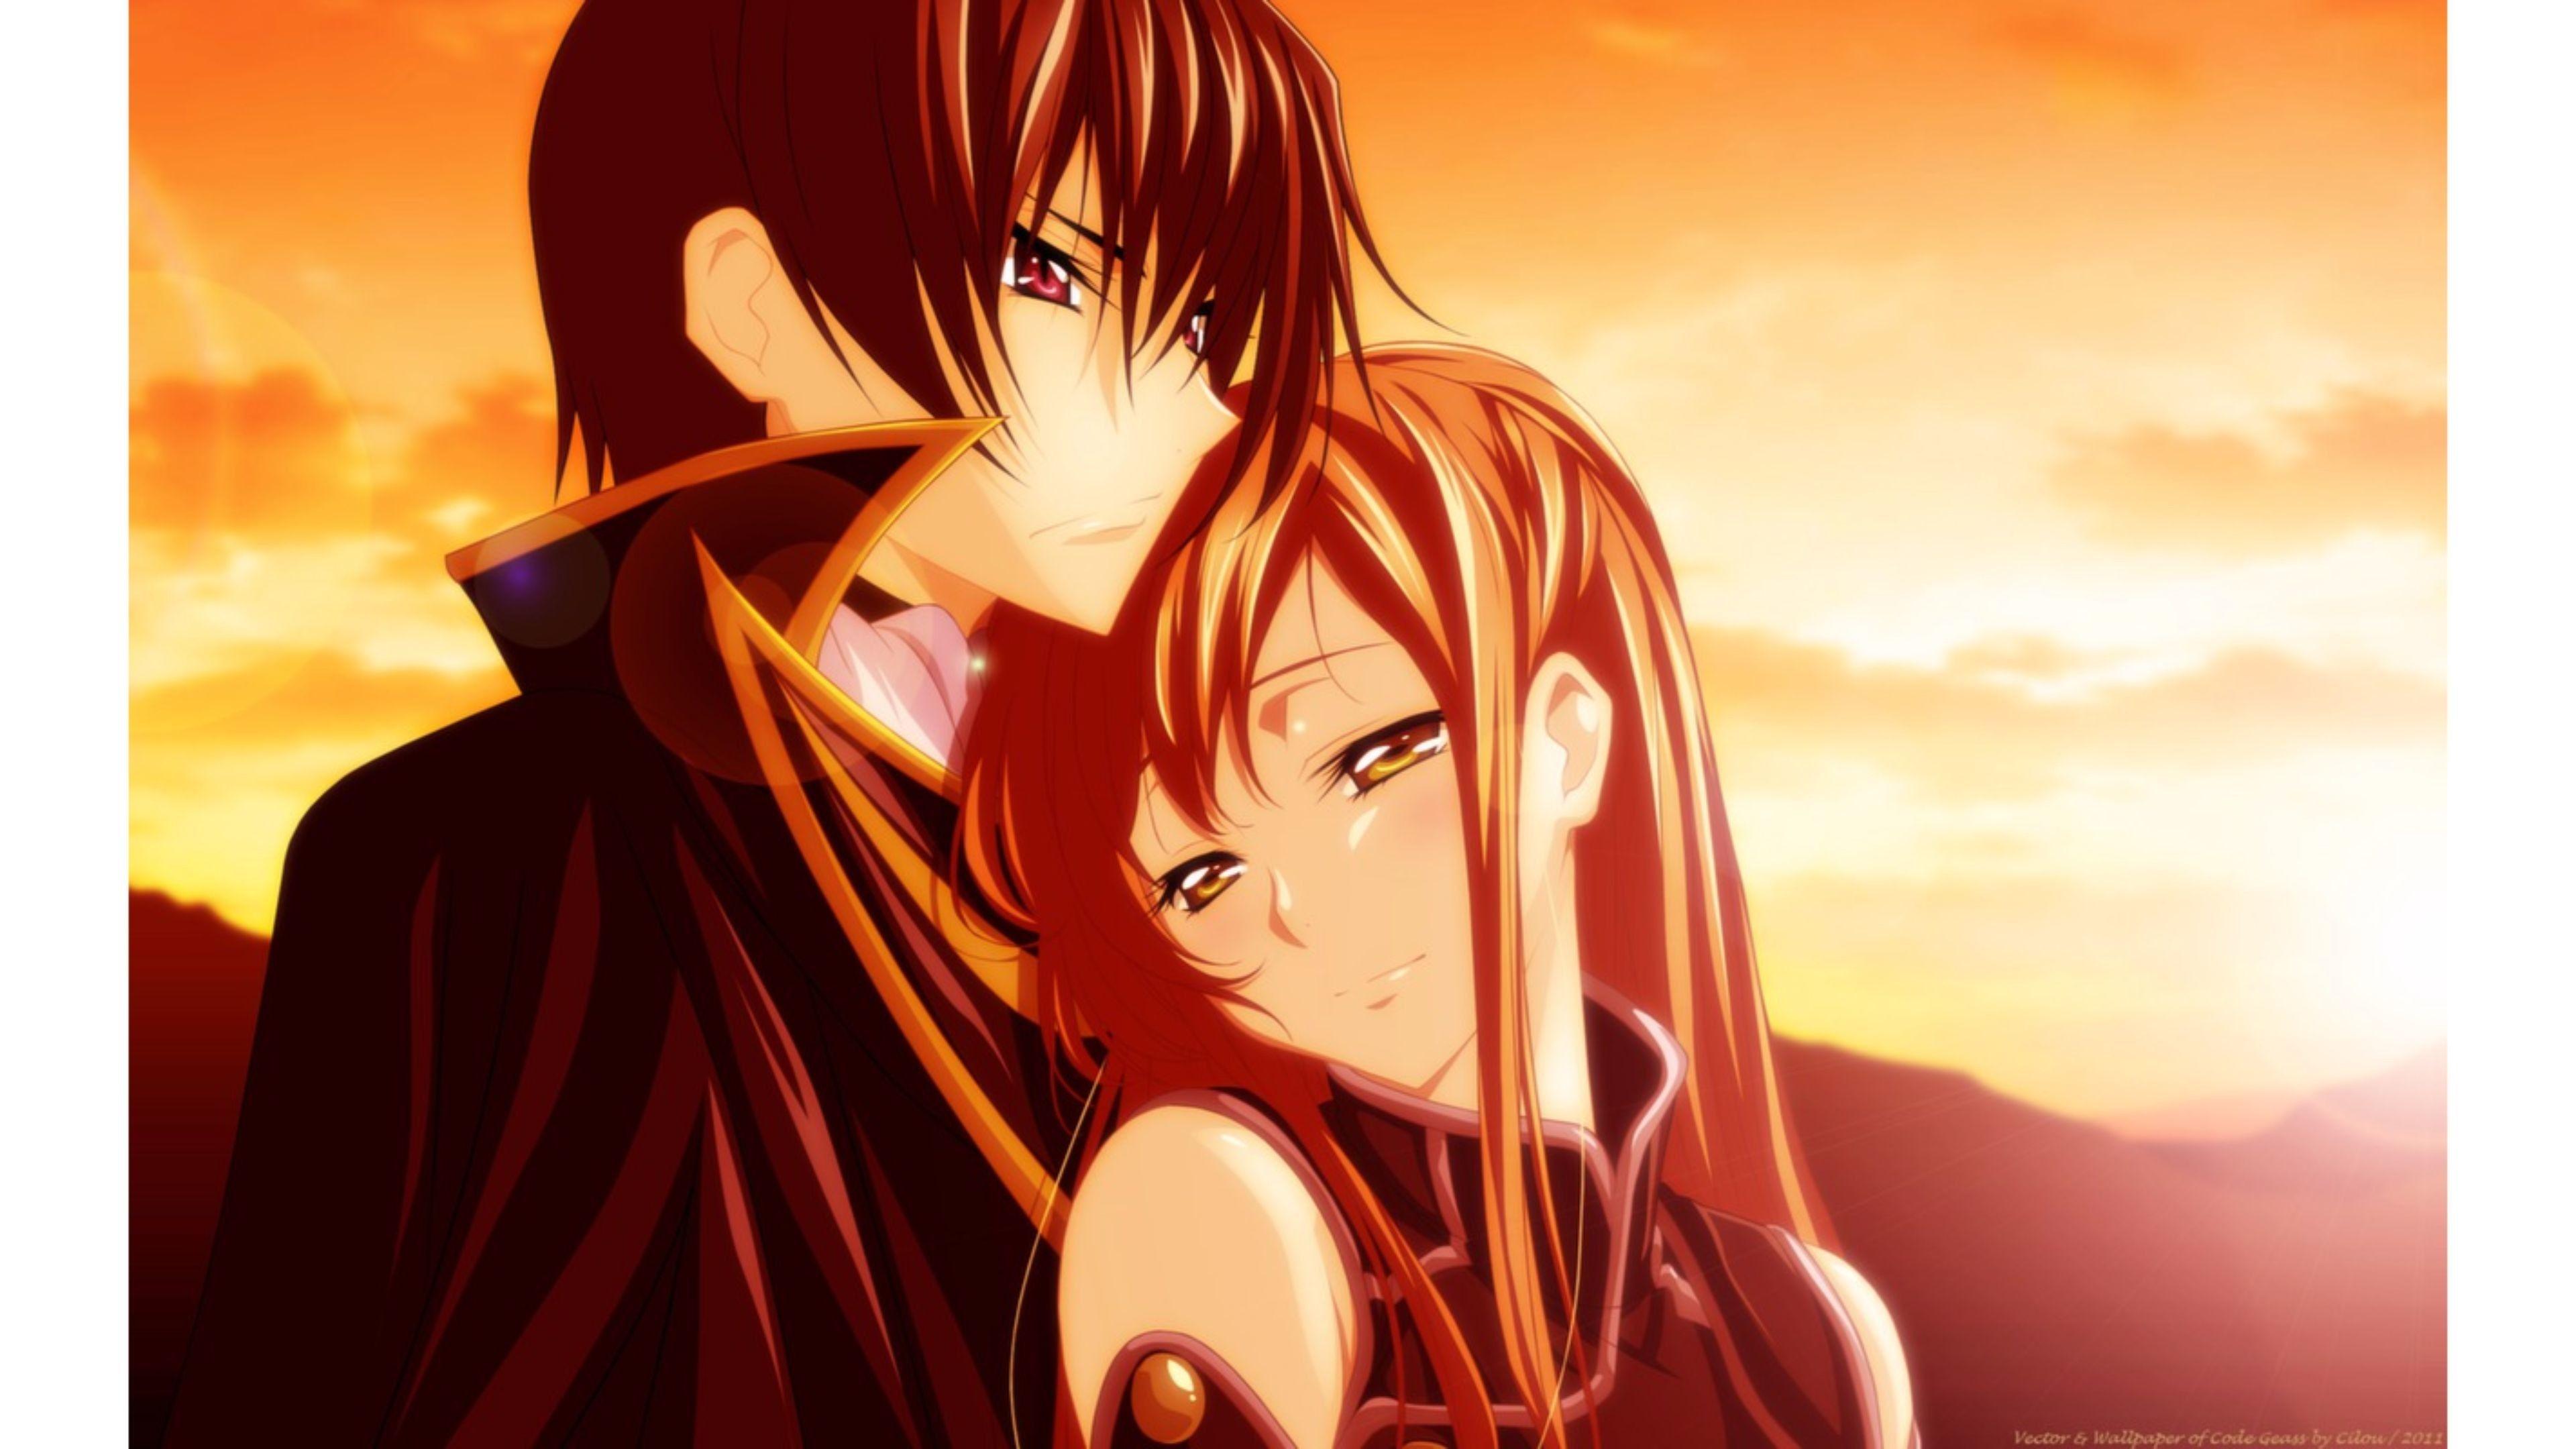  Anime Love  Wallpapers Top Free Anime Love  Backgrounds  